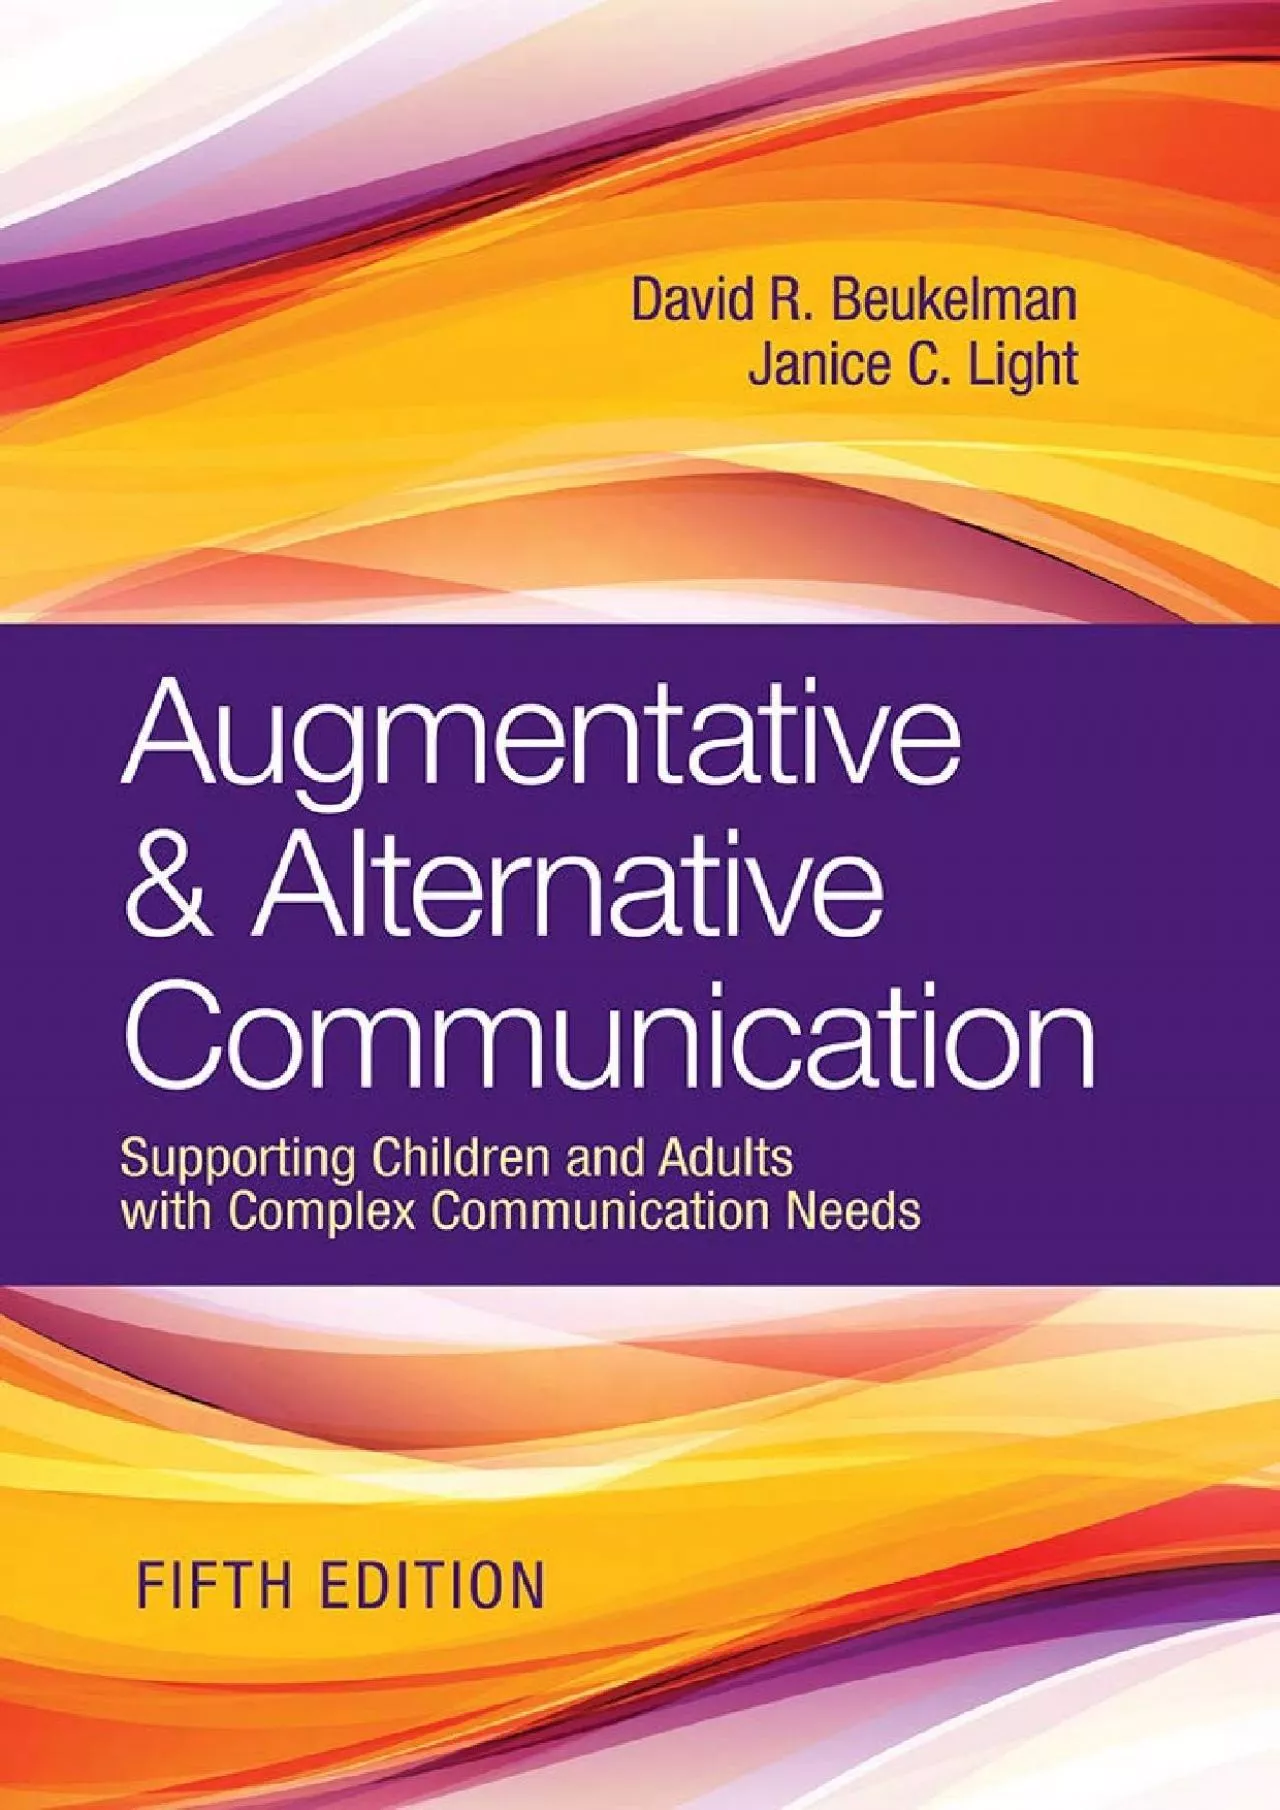 (EBOOK)-Augmentative & Alternative Communication: Supporting Children and Adults with